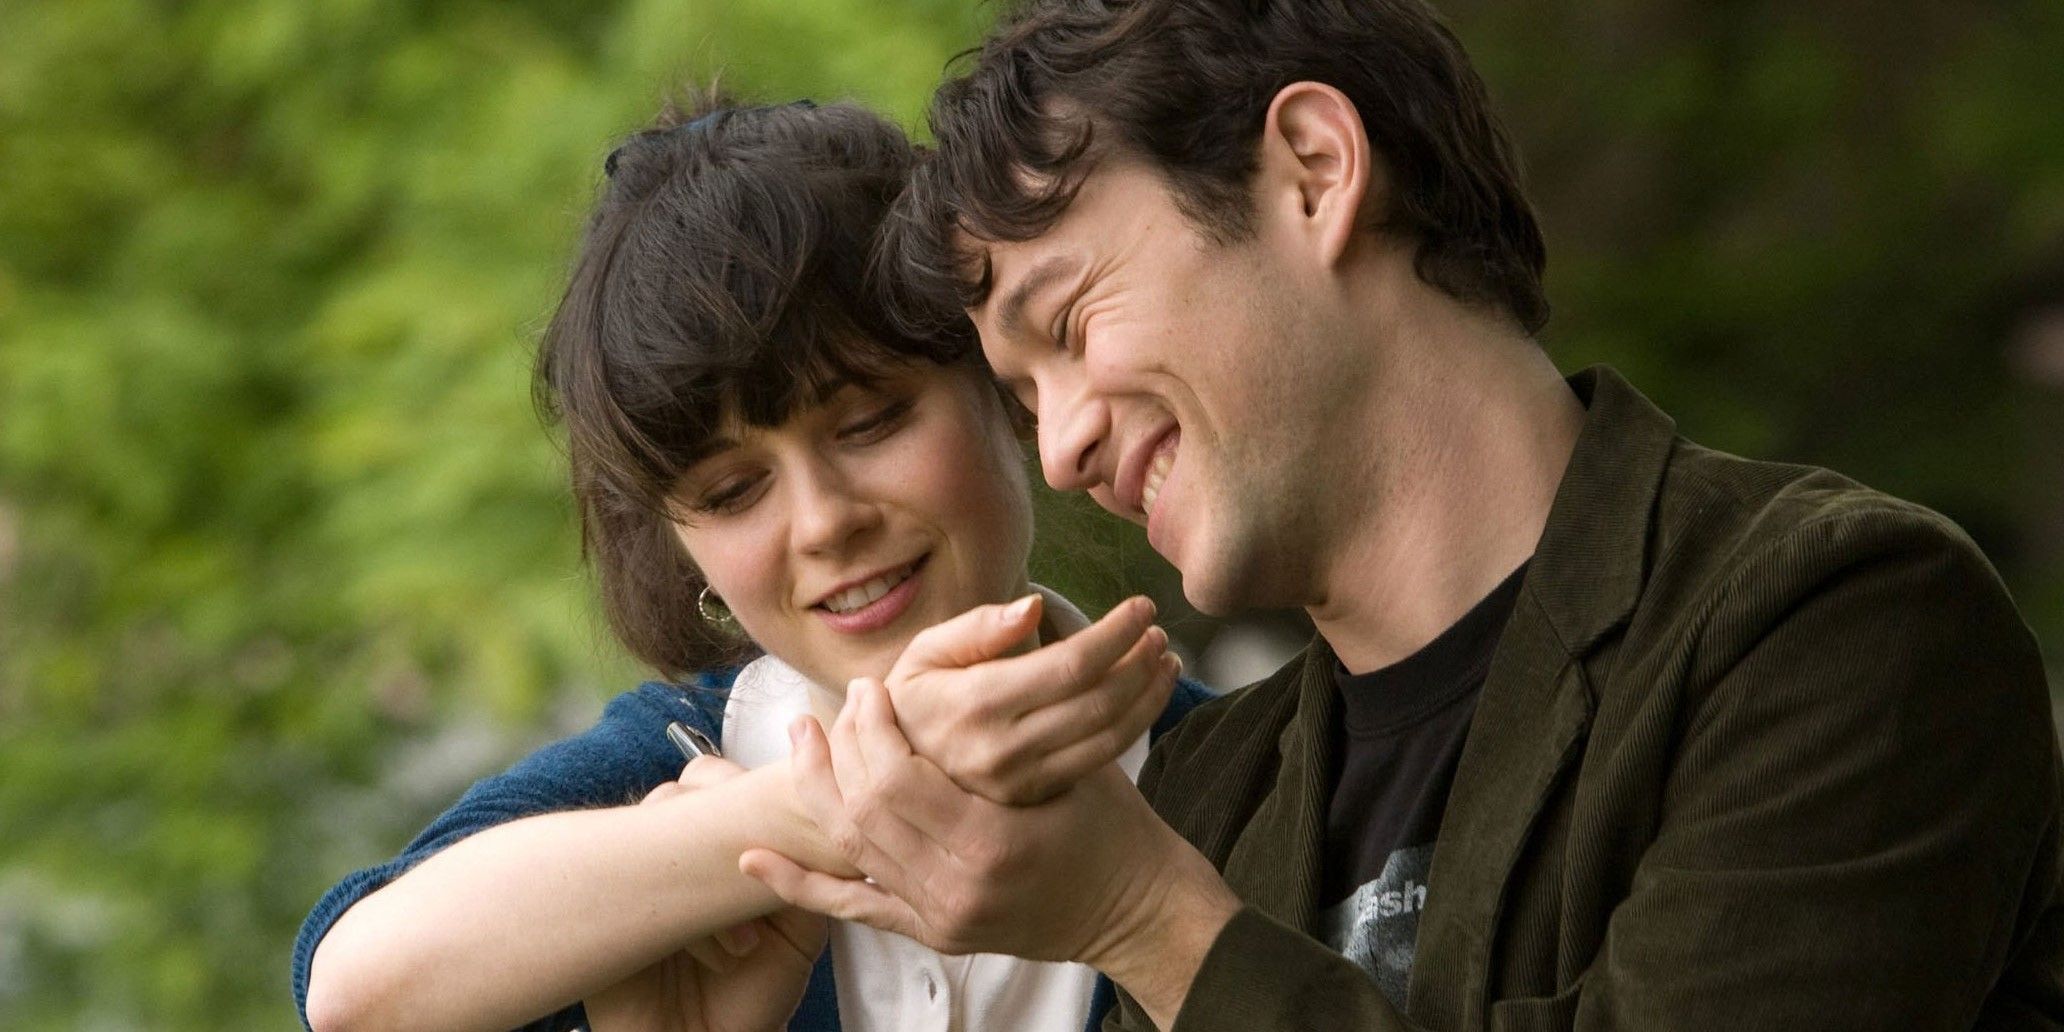 Tom and Summer at the bench in 500 Days of Summer